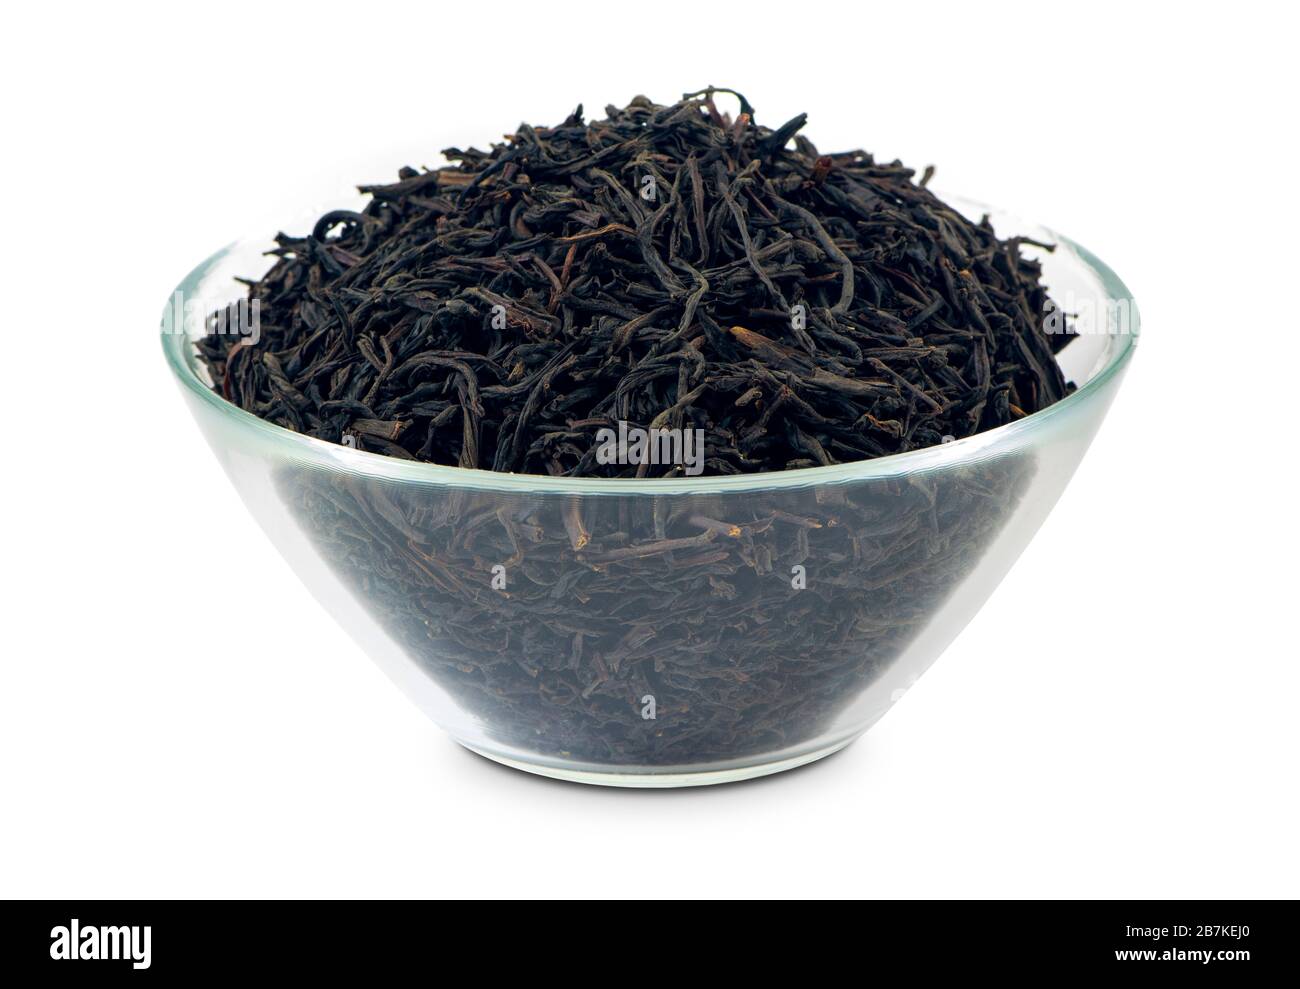 Black loose tea in a glass bowl, isolated on white background. Good quality Ceylon tea with big opa leaves. Stock Photo